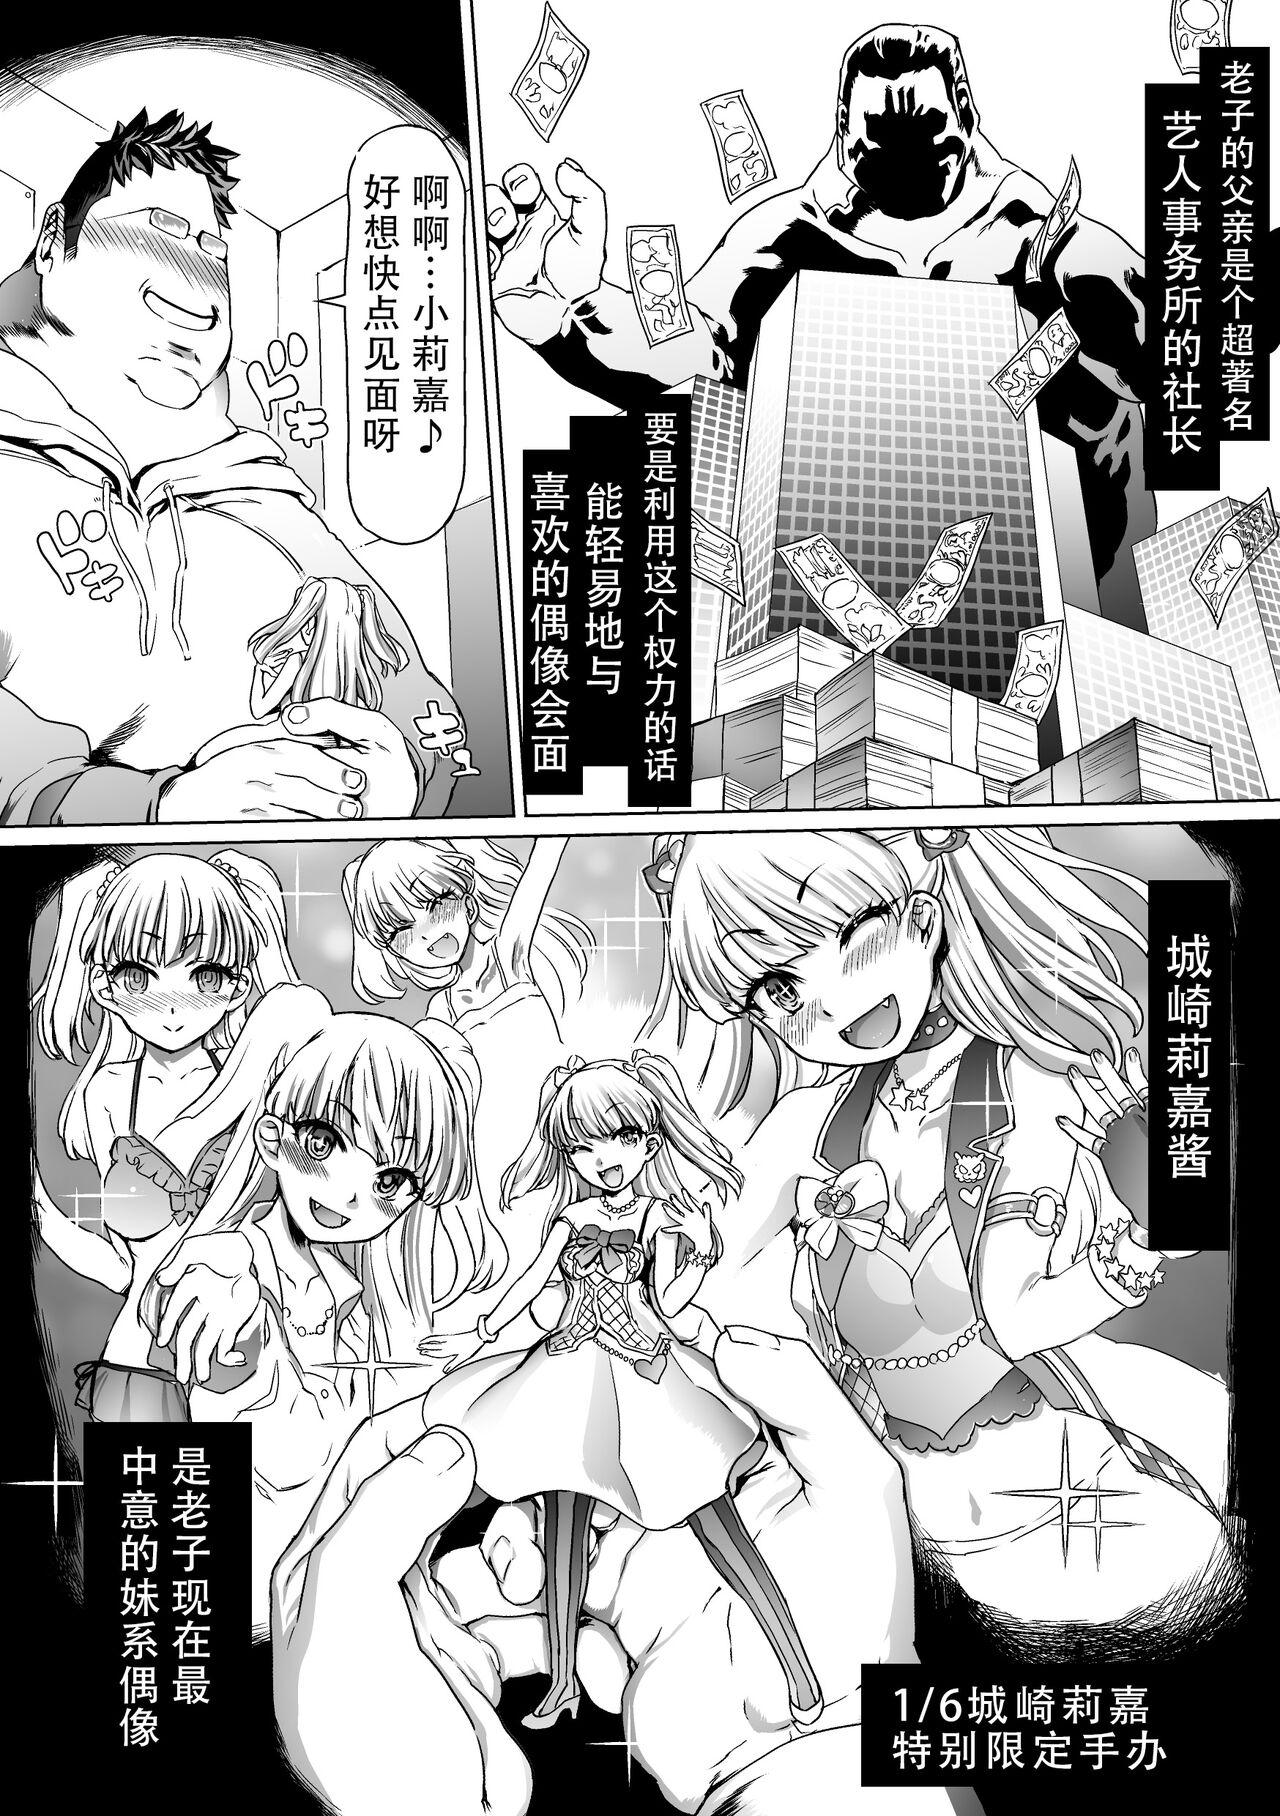 Camshow Omake - The idolmaster Skirt - Page 2